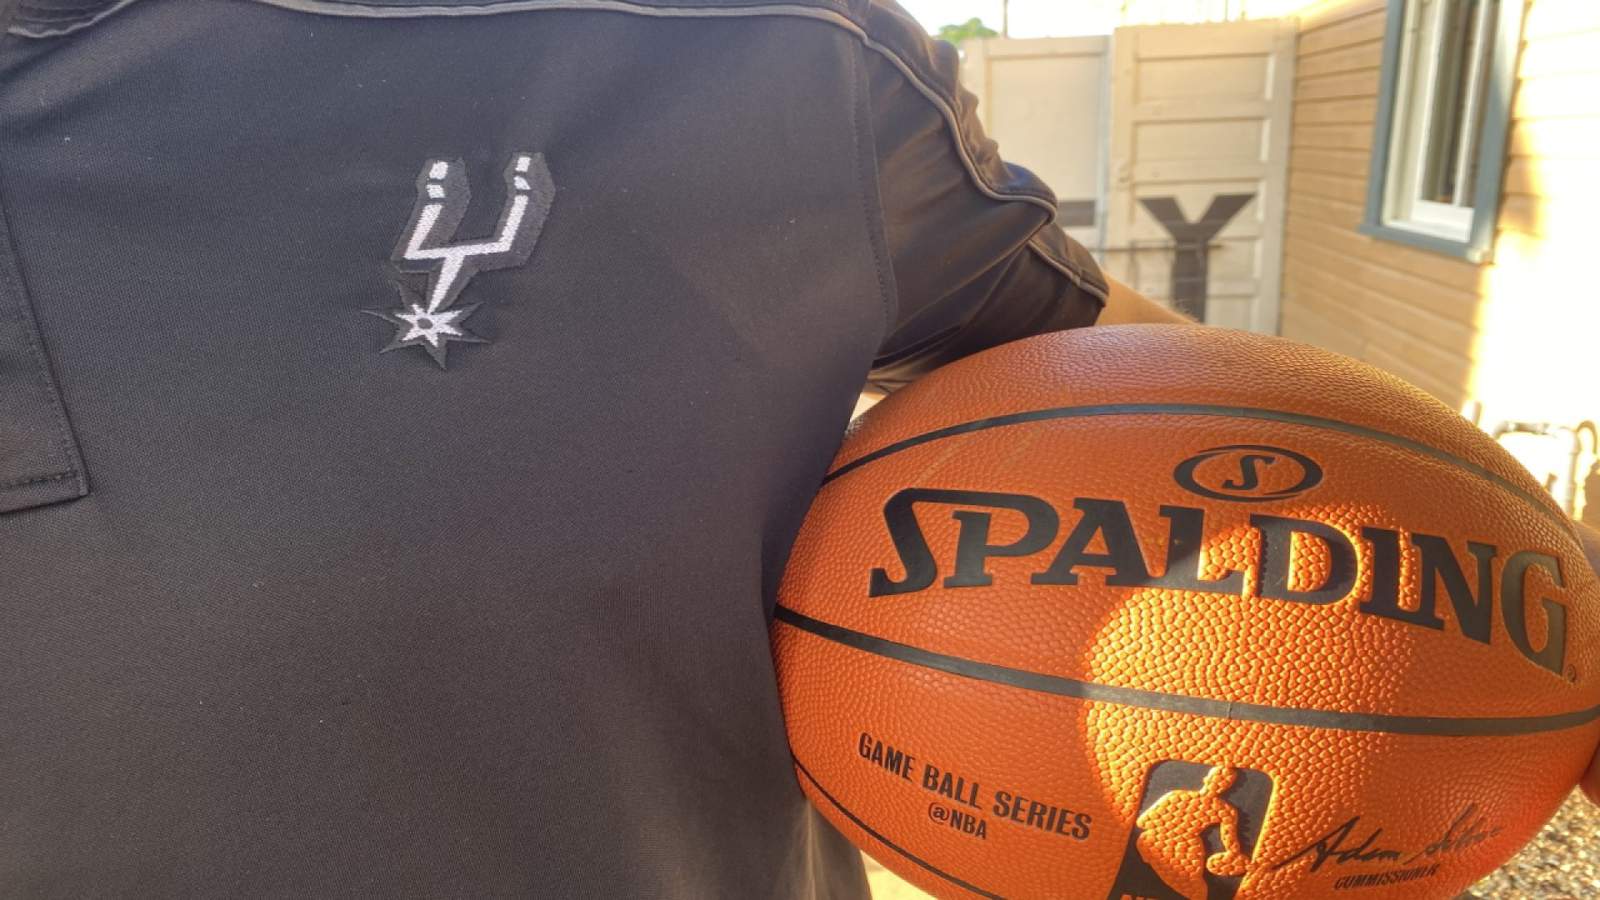 Spurs Sports Academy to host virtual basketball clinics for youth starting July 13